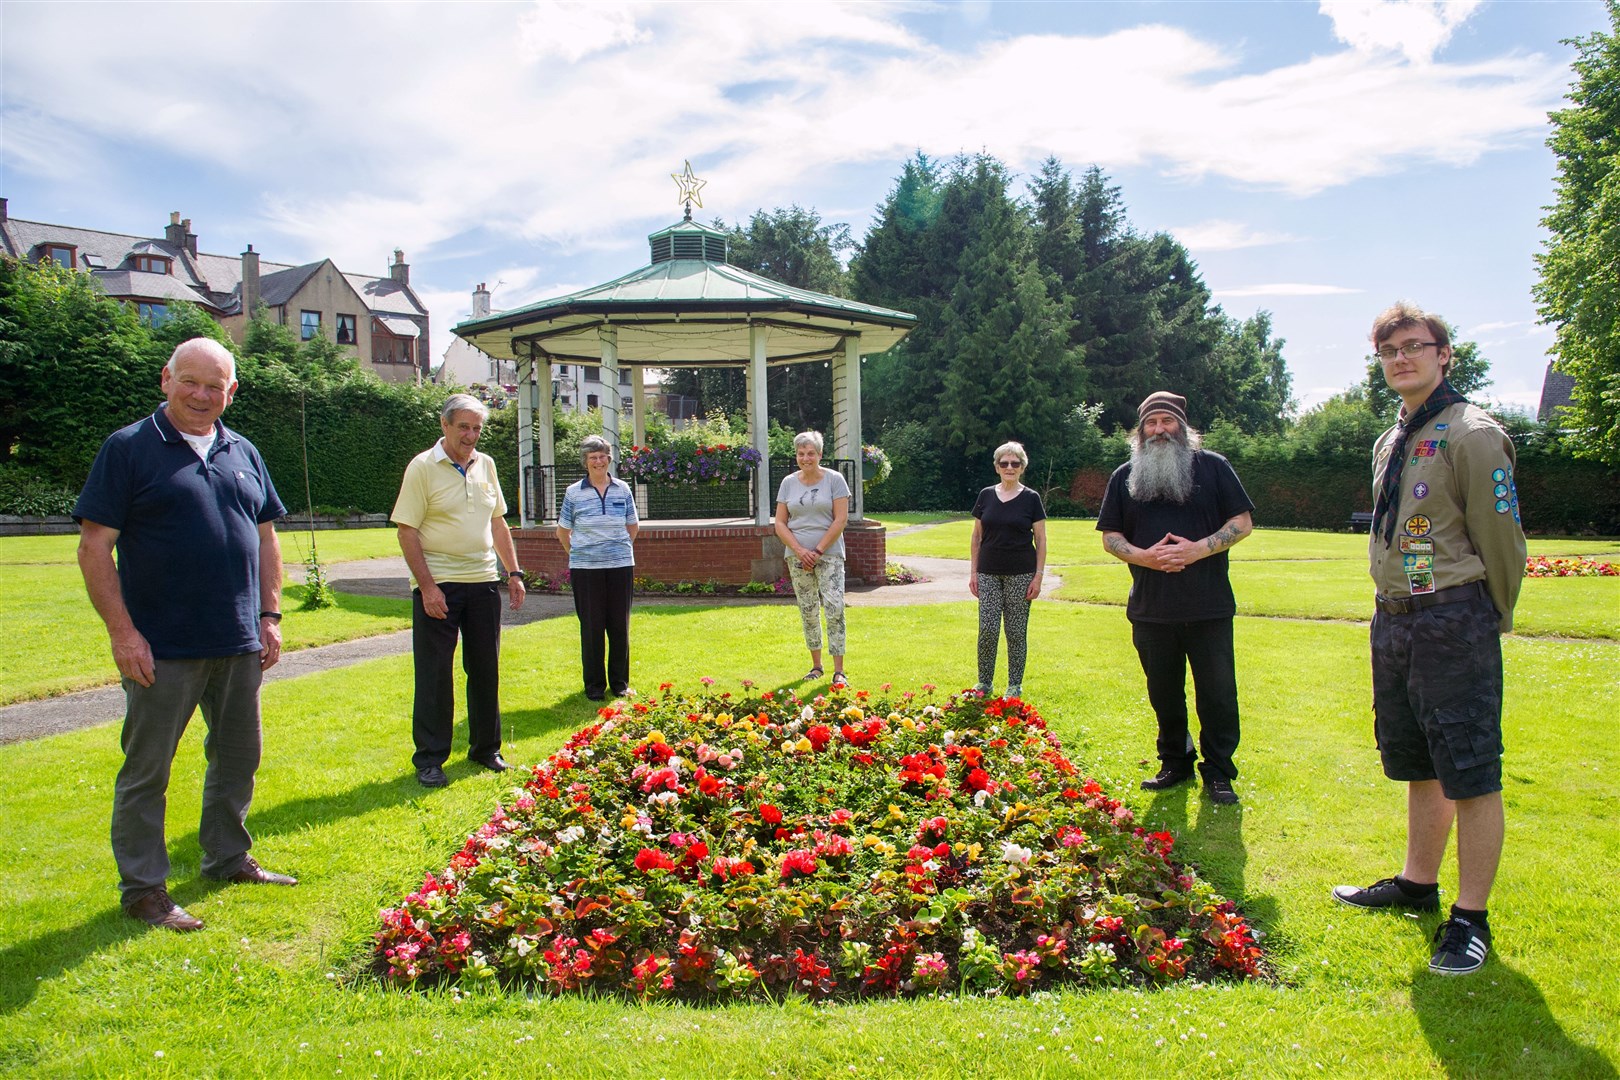 (From left) Dave Carson, of Keith In Flower and Keith Rotary Club; Dennis Reid, of Keith Men's Shed; 50-plus Ladies Walking Group members Jenny Reid, Rosemary Sutherland and Loveina Clarke; Gary Andrew, of Moray Council lands and parks; and Reece Mackie, of the Explorer Scouts, at Keith bandstand, where a big effort has been made by community groups to replant and brighten the area. Picture: Daniel Forsyth.